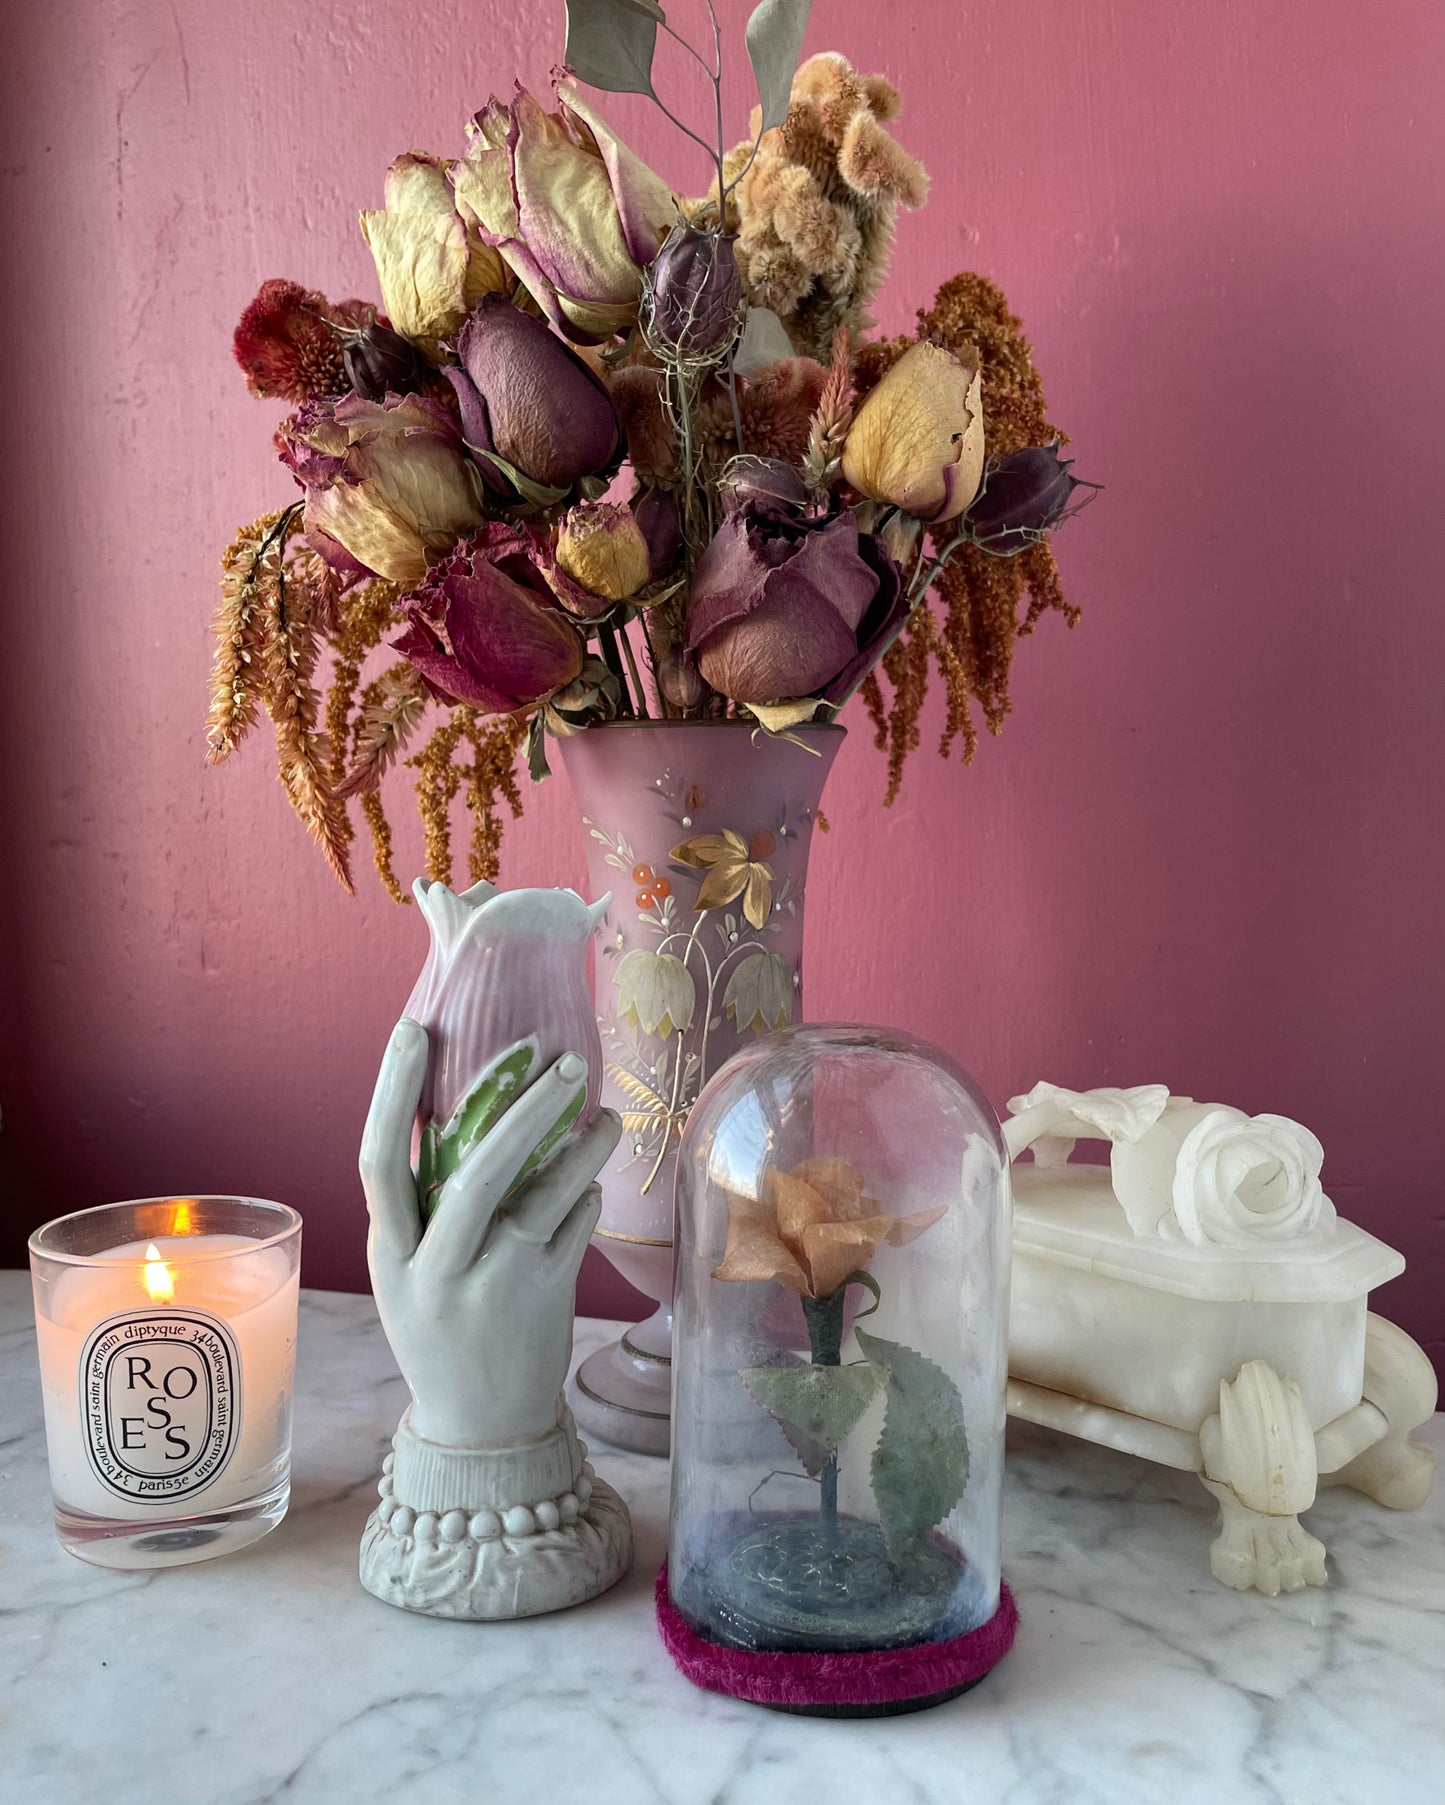 Antique Wax Rose under Glass Dome